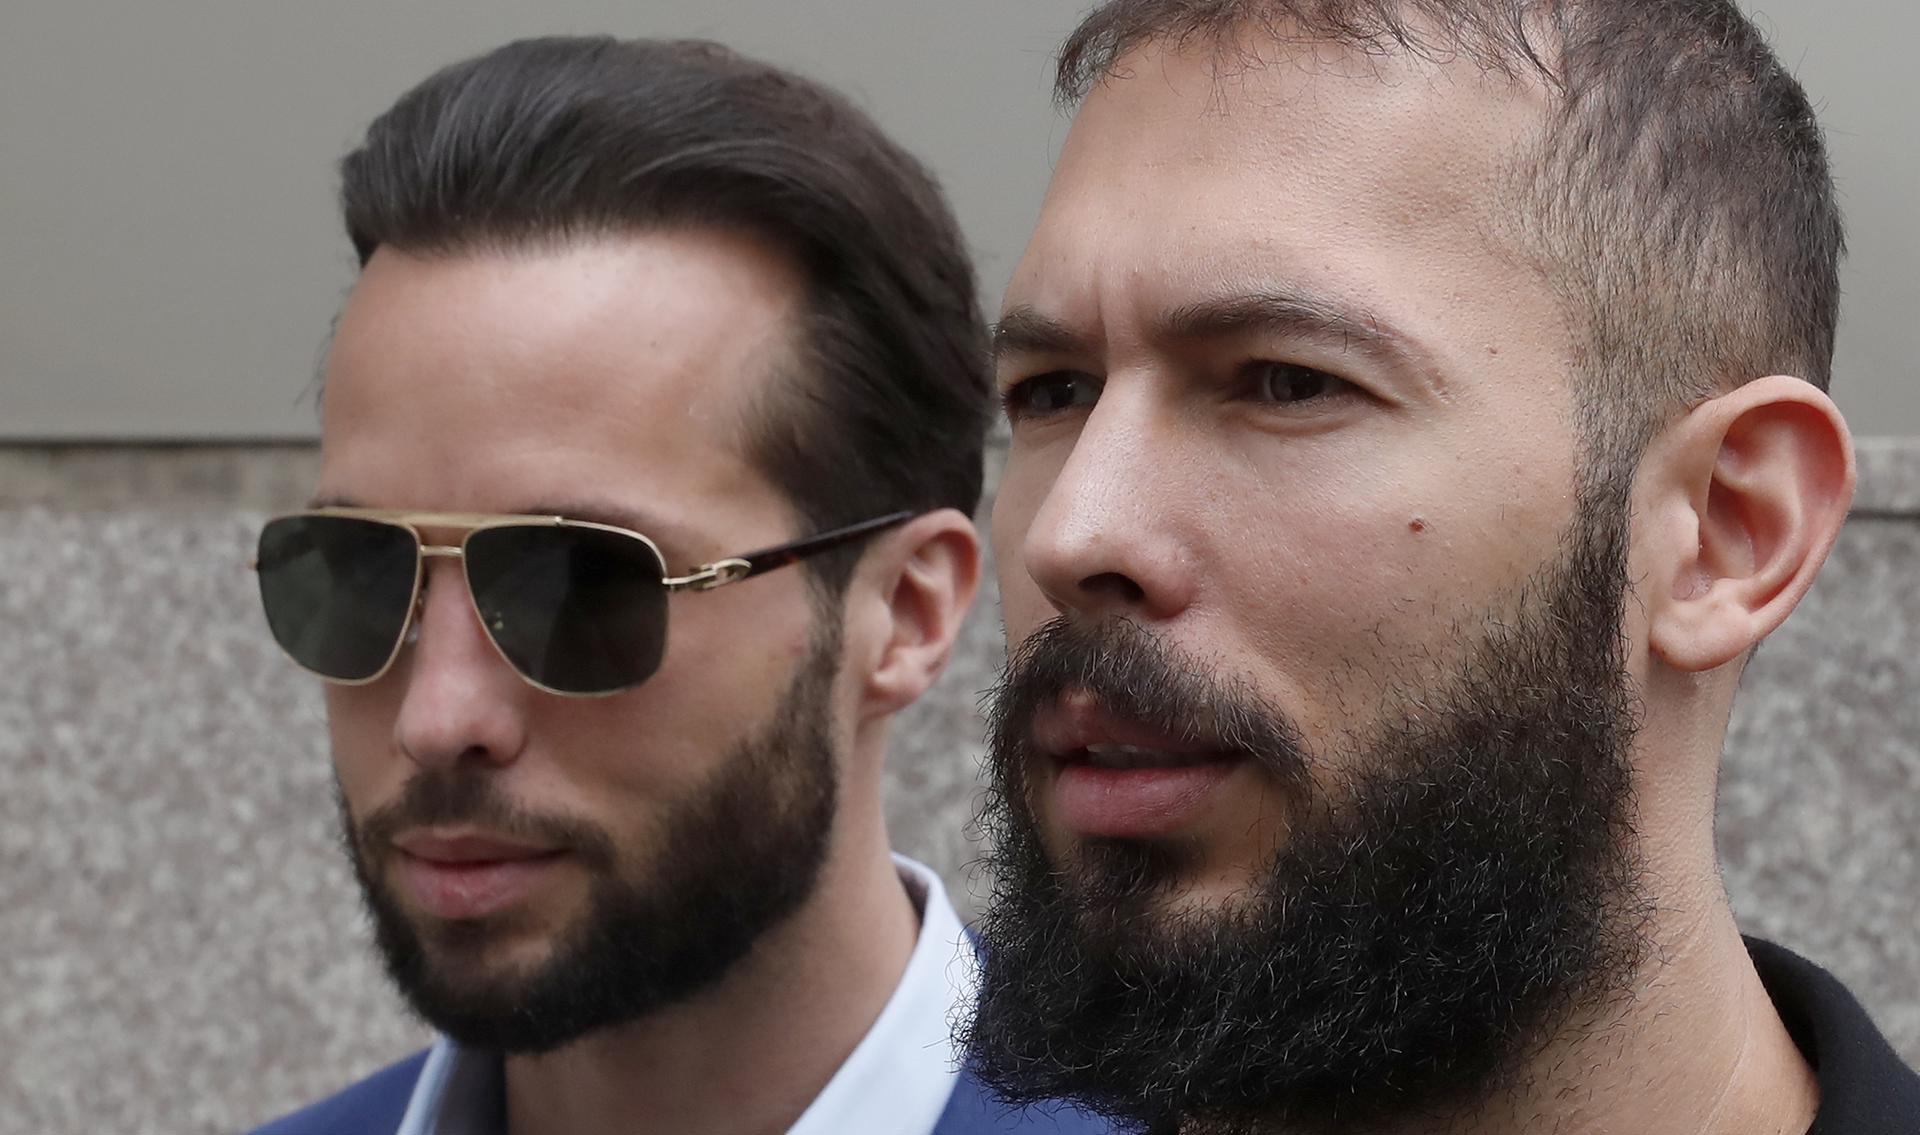 Former professional kickboxer and social media influencer Andrew Tate (R), is followed by his brother Tristan (L), as he leaves the court after being presented to a judge for an extension of their house arrest, in Bucharest, Romania, 21 April 2023.EFE/EPA/ROBERT GHEMENT